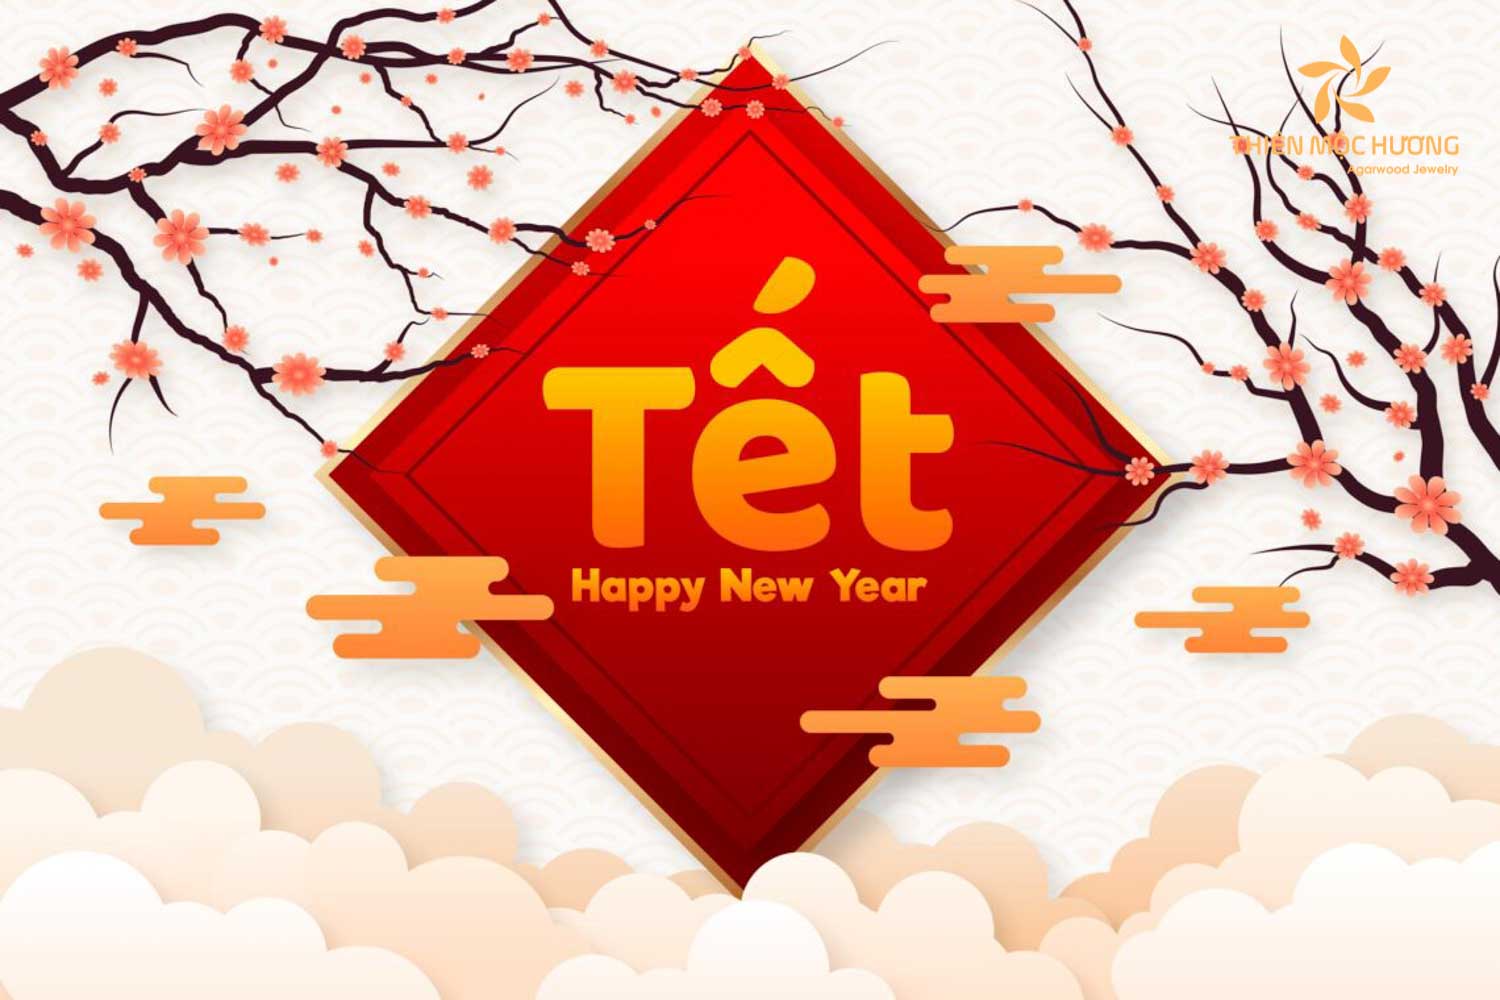 Cultural richness of Tet wishes